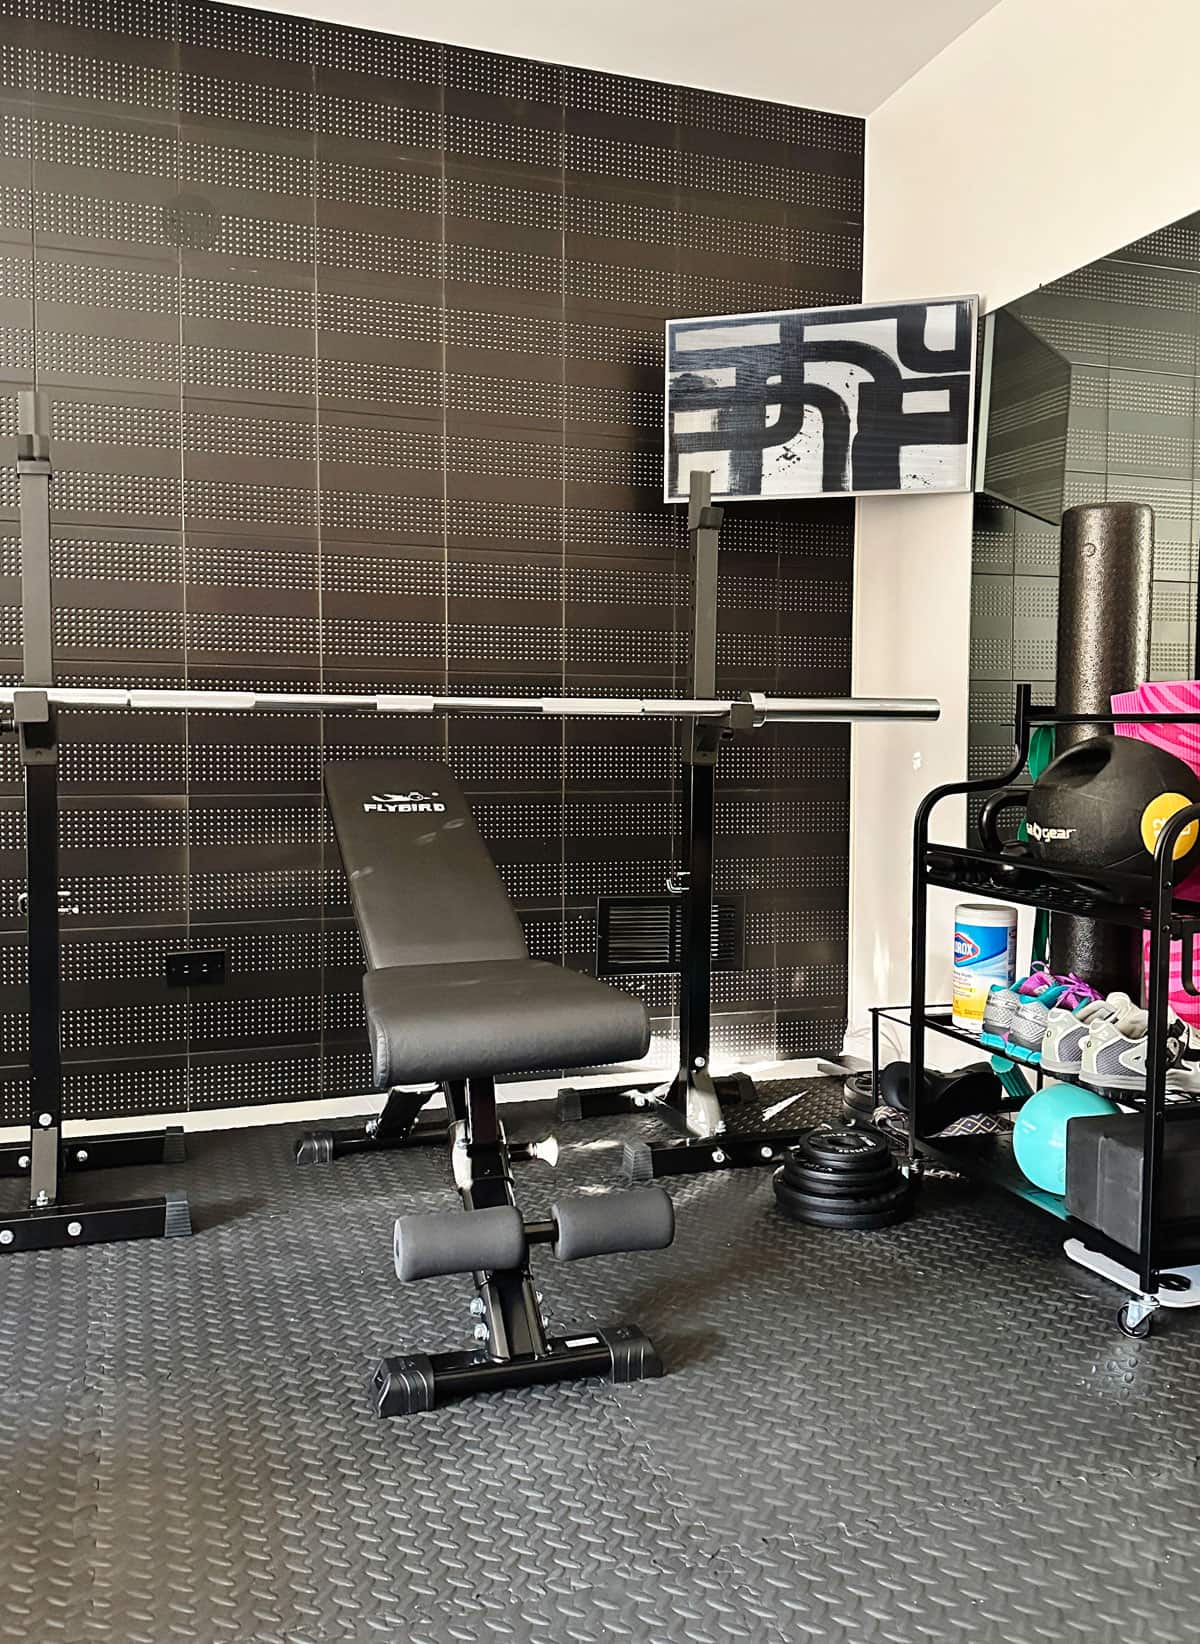 This Compact Home Gym Equipment is Ideal for Small Spaces